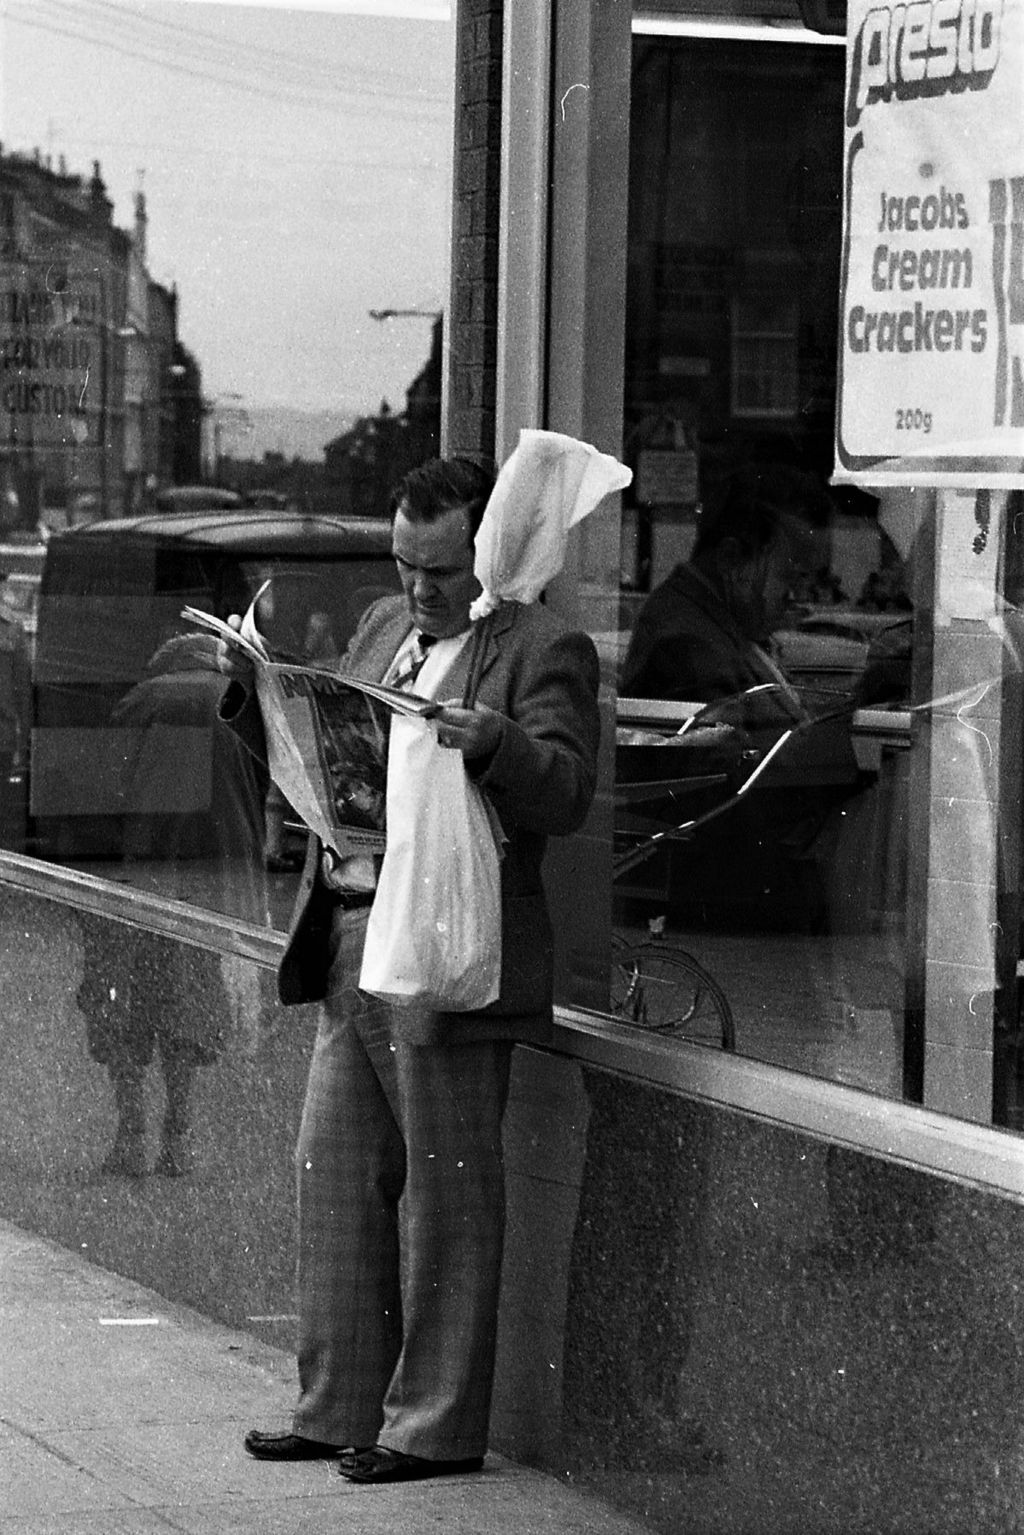 A music fan catches up with the latest edition of NME in Byres Road in 1981.